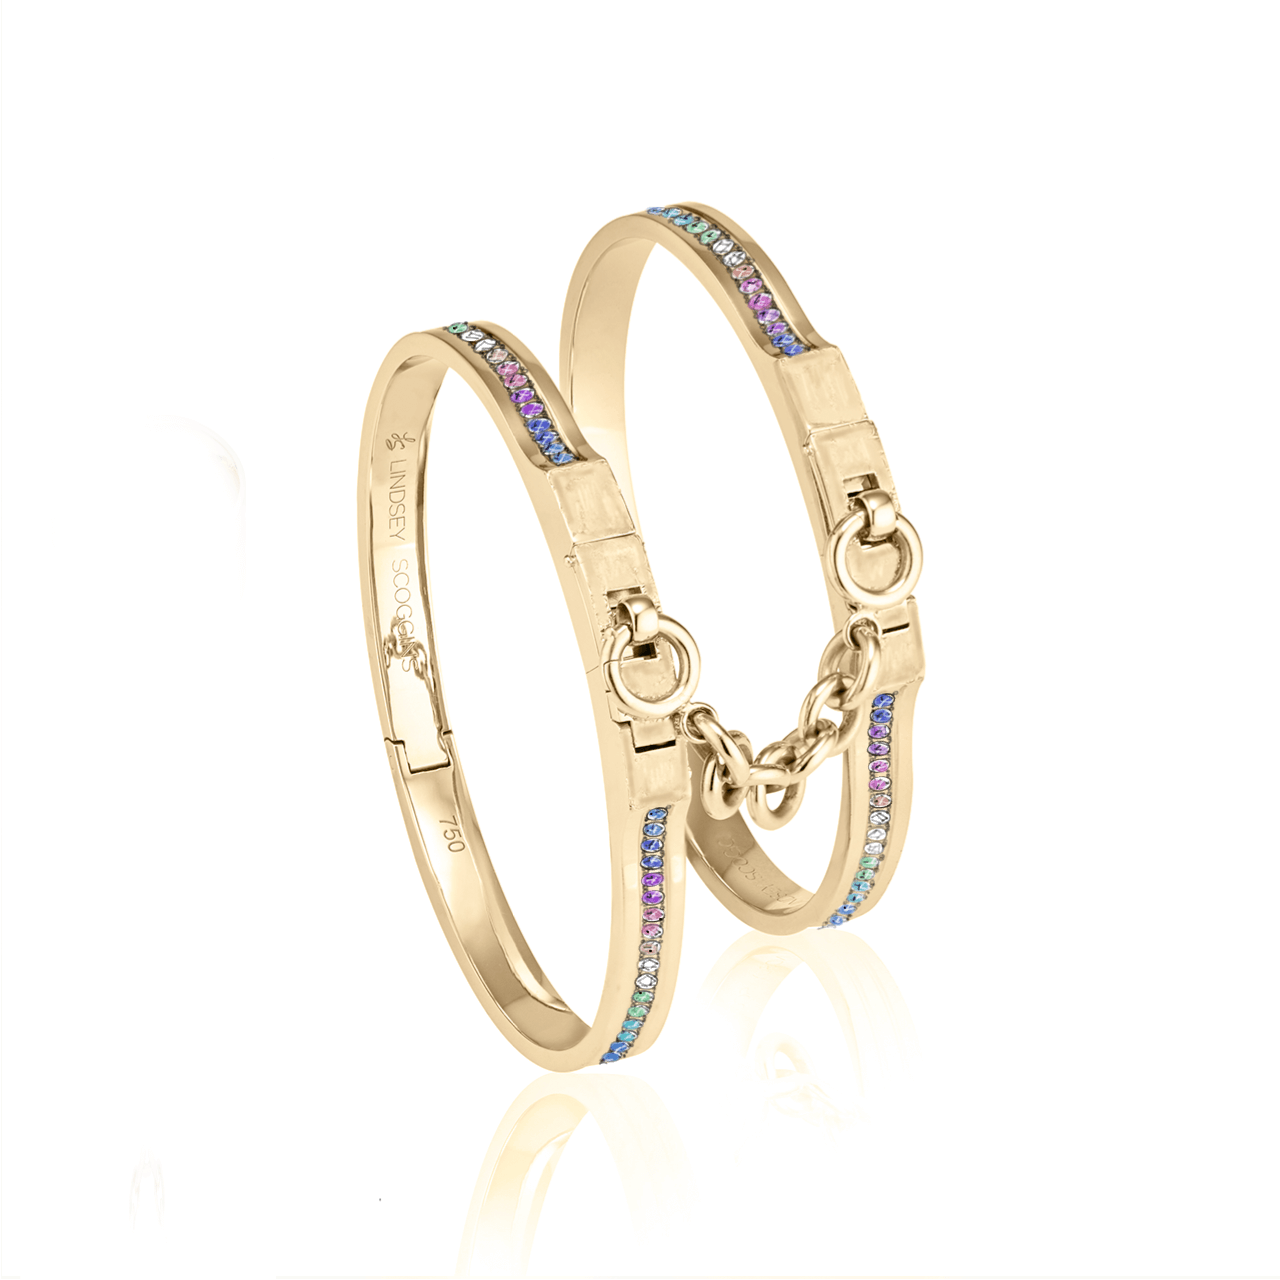 oath double cuffs with rainbow sapphires